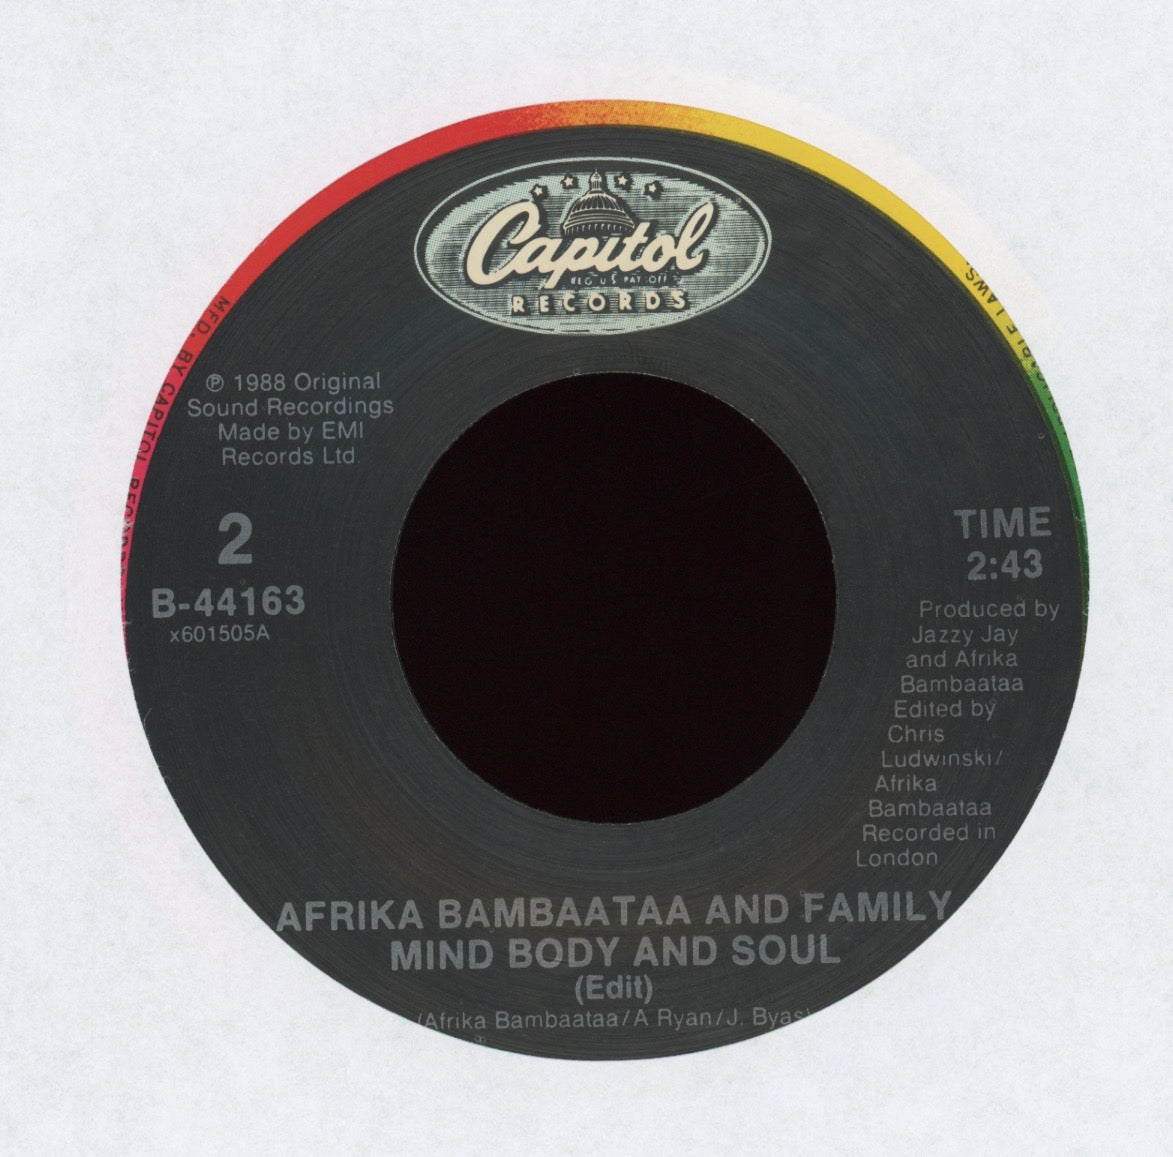 Afrika Bambaataa & Family With UB40 - Reckless on Capitol With Picture Sleeve